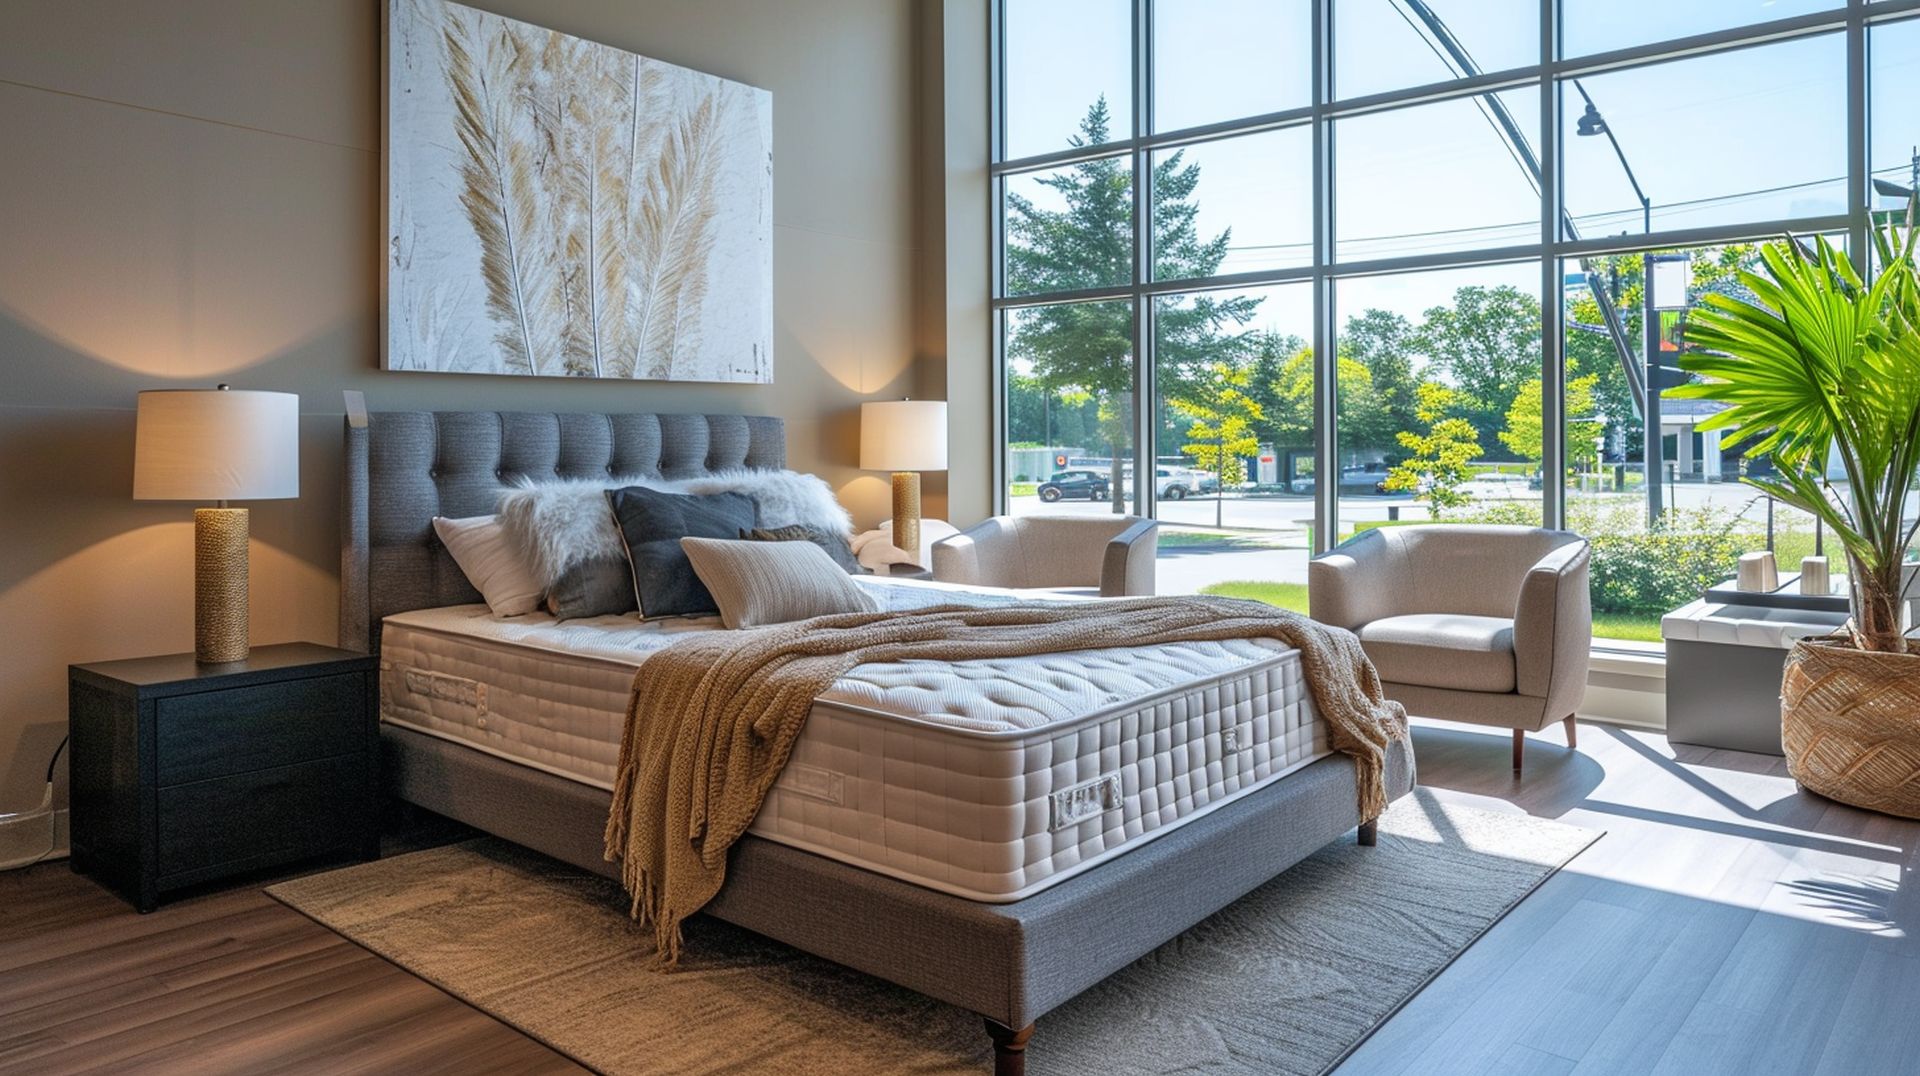 If you're looking for a new bed, mattress stores in Pinellas Park offer the best customer and delivery service, financing, and warranties in Florida